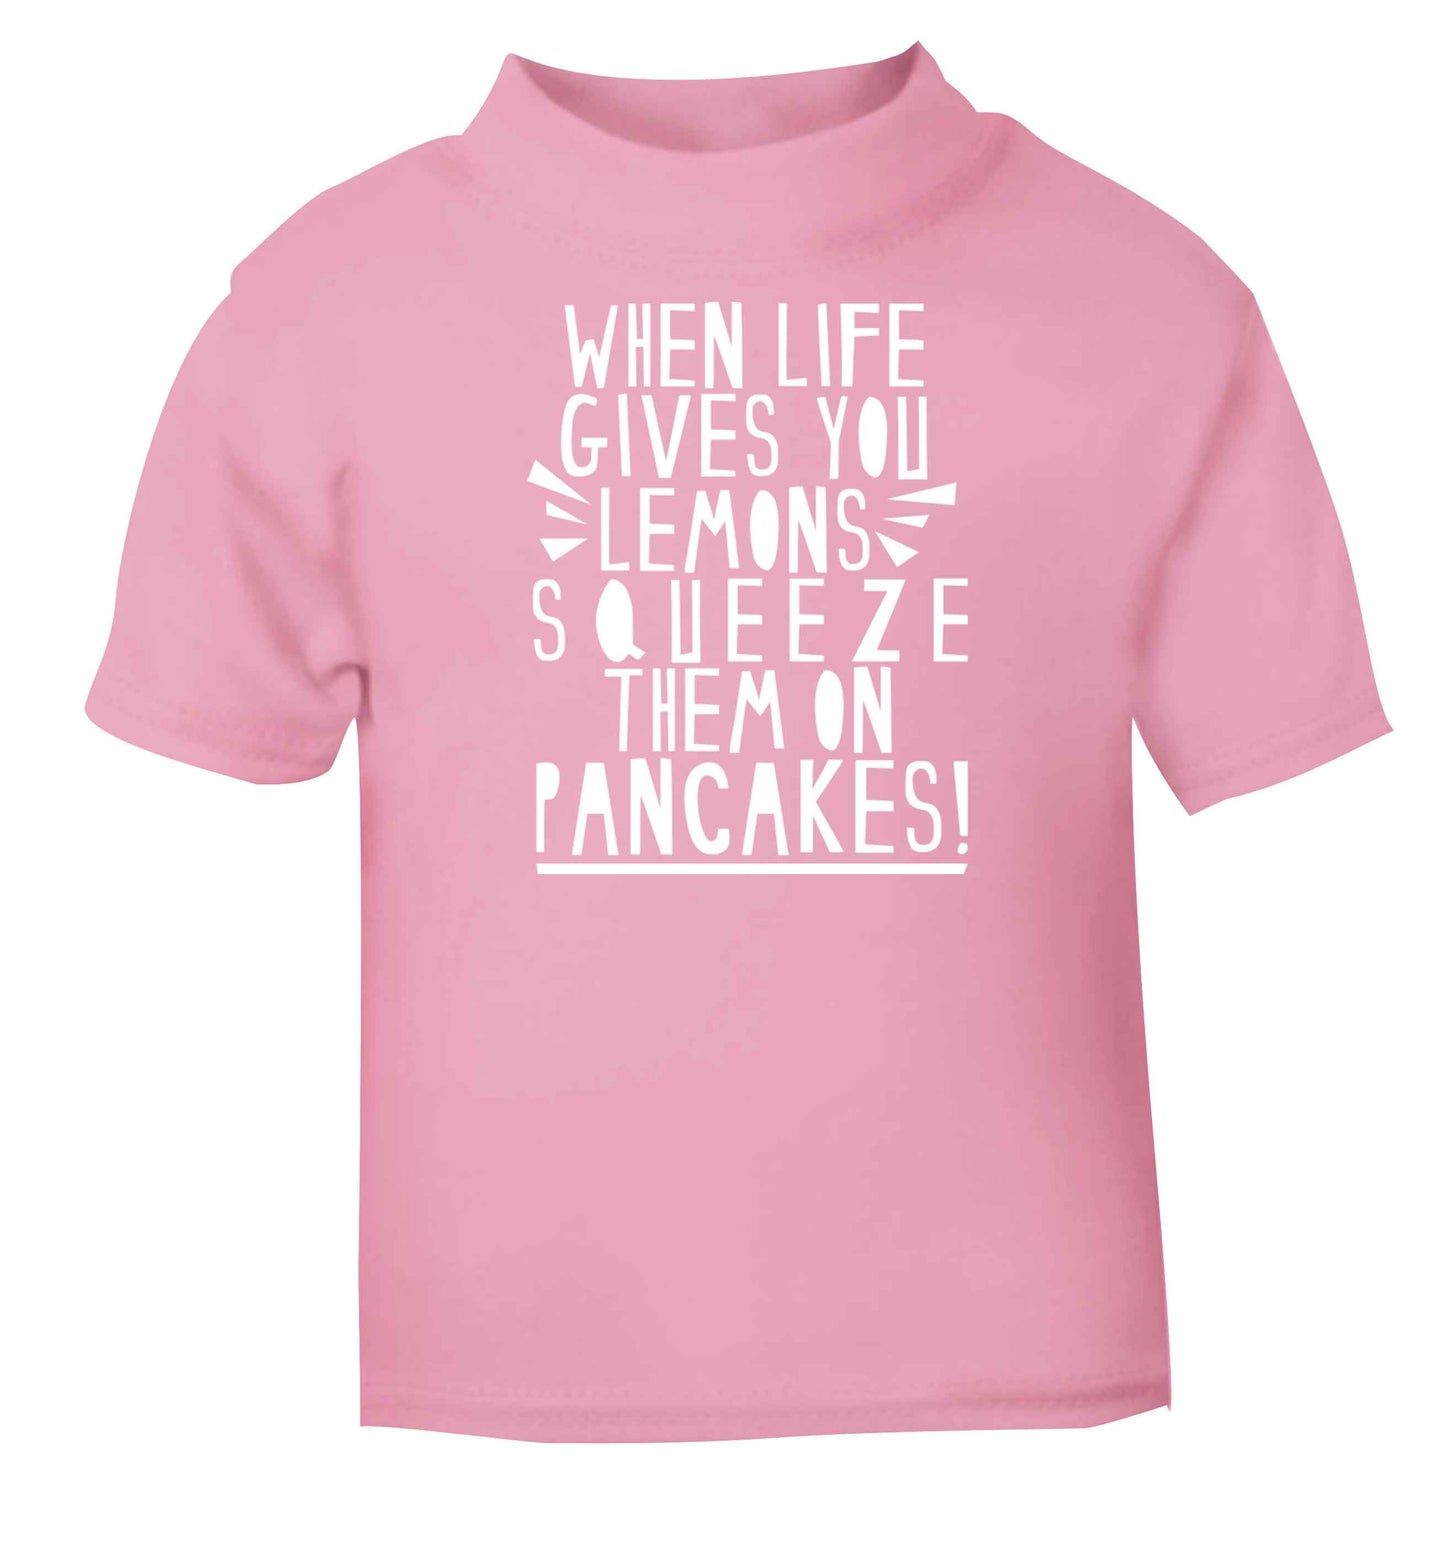 When life gives you lemons squeeze them on pancakes! light pink baby toddler Tshirt 2 Years